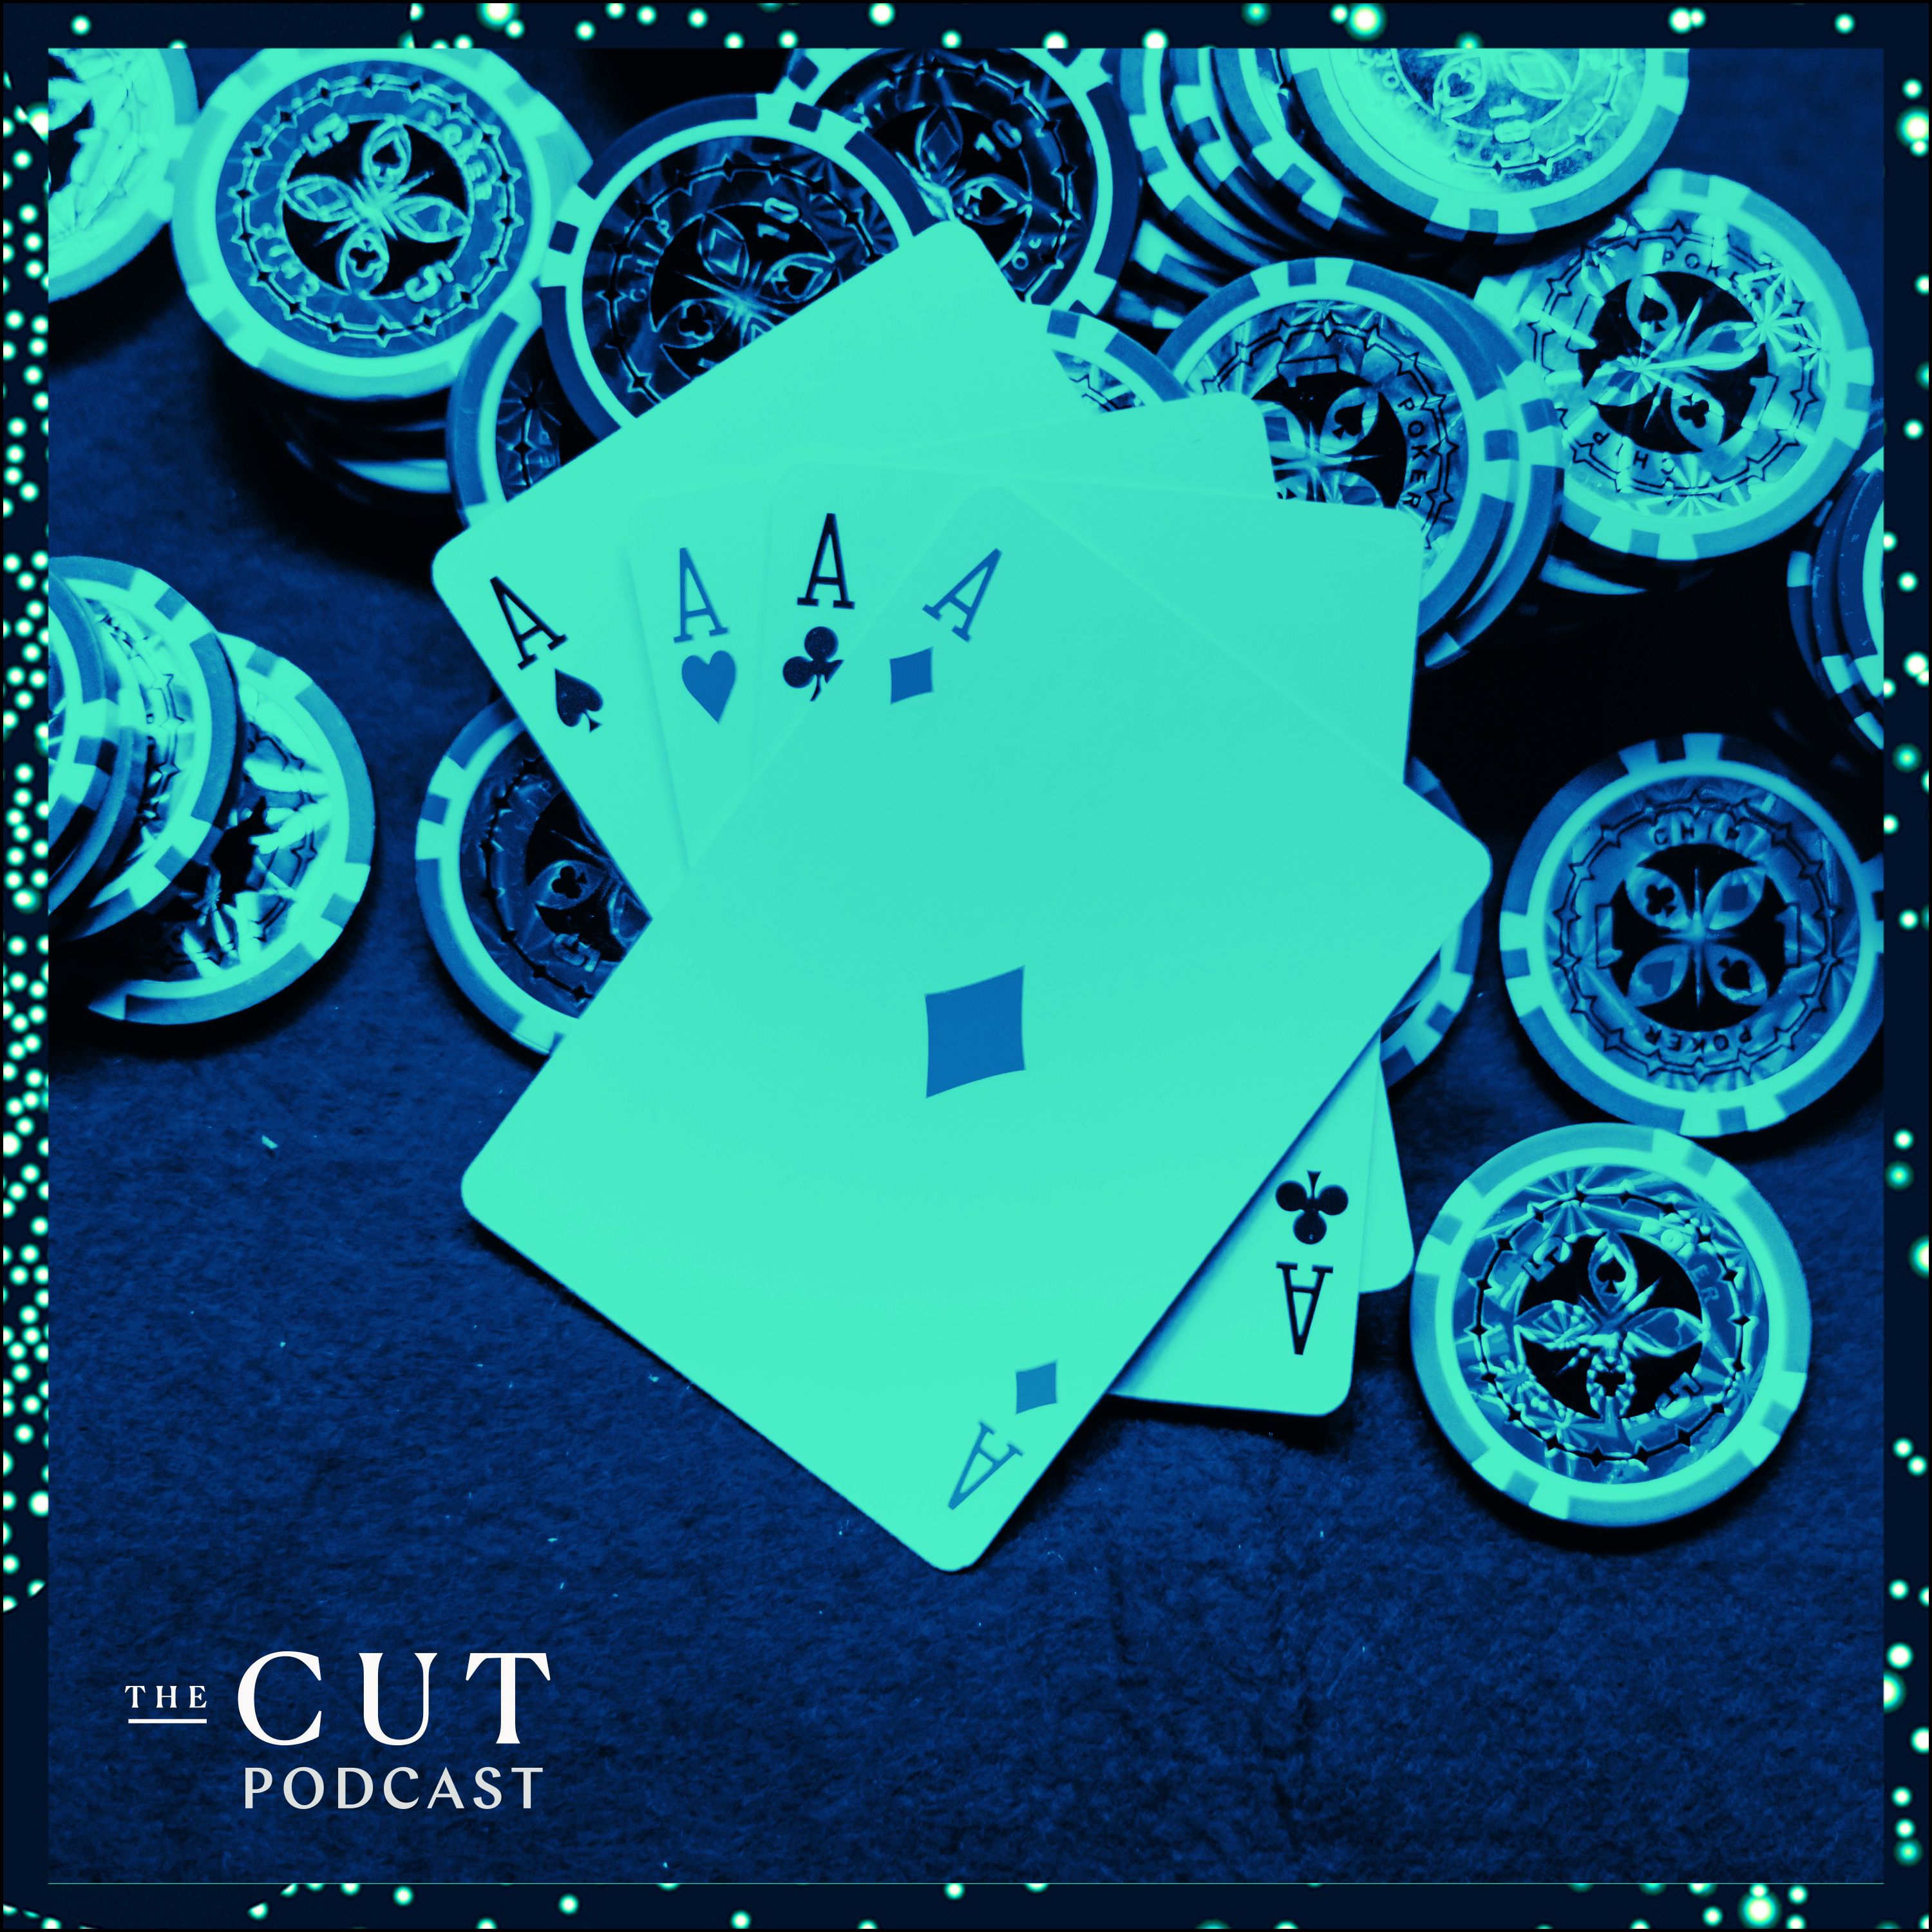 The Cut Podcast Can Poker Help You Win at Life? pic